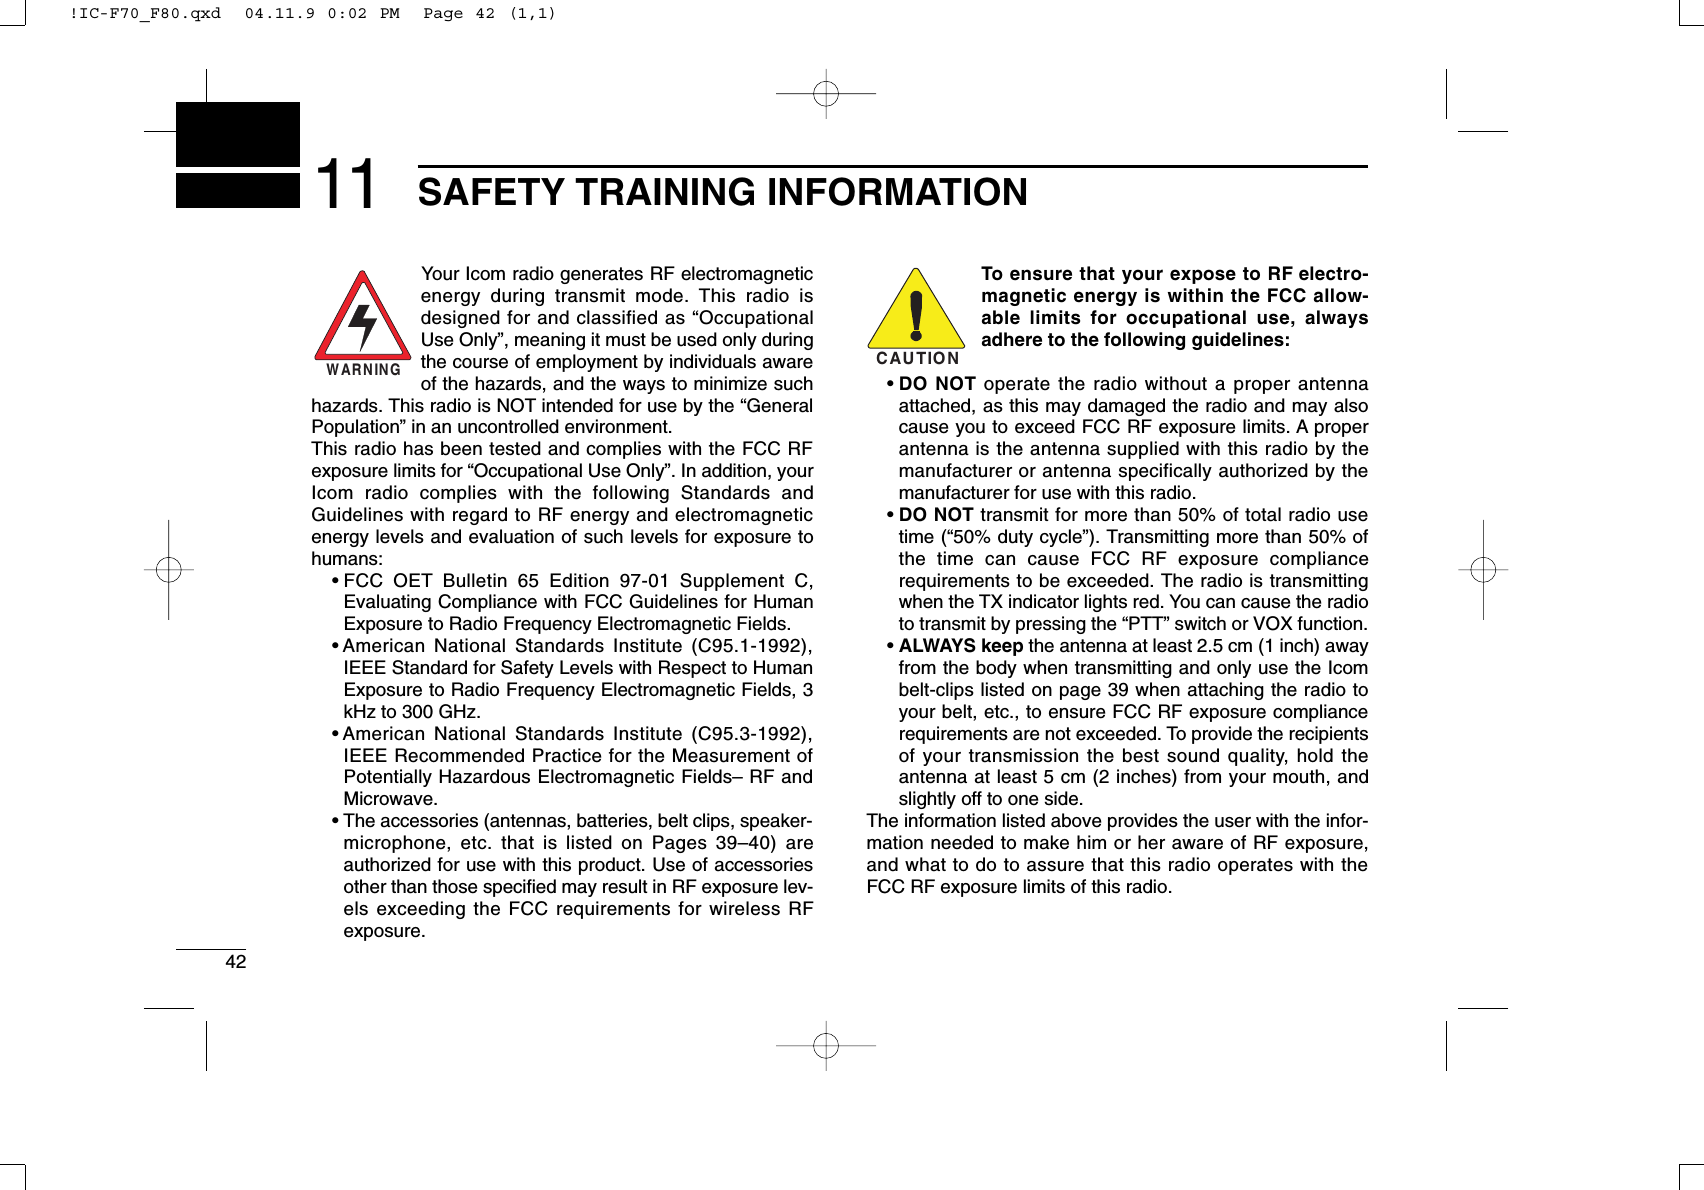 4211 SAFETY TRAINING INFORMATIONYour Icom radio generates RF electromagneticenergy during transmit mode. This radio isdesigned for and classified as “OccupationalUse Only”, meaning it must be used only duringthe course of employment by individuals awareof the hazards, and the ways to minimize suchhazards. This radio is NOT intended for use by the “GeneralPopulation” in an uncontrolled environment.This radio has been tested and complies with the FCC RFexposure limits for “Occupational Use Only”. In addition, yourIcom radio complies with the following Standards andGuidelines with regard to RF energy and electromagneticenergy levels and evaluation of such levels for exposure tohumans:• FCC OET Bulletin 65 Edition 97-01 Supplement C,Evaluating Compliance with FCC Guidelines for HumanExposure to Radio Frequency Electromagnetic Fields.• American National Standards Institute (C95.1-1992),IEEE Standard for Safety Levels with Respect to HumanExposure to Radio Frequency Electromagnetic Fields, 3kHz to 300 GHz.• American National Standards Institute (C95.3-1992),IEEE Recommended Practice for the Measurement ofPotentially Hazardous Electromagnetic Fields– RF andMicrowave.• The accessories (antennas, batteries, belt clips, speaker-microphone, etc. that is listed on Pages 39–40) areauthorized for use with this product. Use of accessoriesother than those speciﬁed may result in RF exposure lev-els exceeding the FCC requirements for wireless RFexposure.To ensure that your expose to RF electro-magnetic energy is within the FCC allow-able limits for occupational use, alwaysadhere to the following guidelines:• DO NOT operate the radio without a proper antennaattached, as this may damaged the radio and may alsocause you to exceed FCC RF exposure limits. A properantenna is the antenna supplied with this radio by themanufacturer or antenna specifically authorized by themanufacturer for use with this radio.• DO NOT transmit for more than 50% of total radio usetime (“50% duty cycle”). Transmitting more than 50% ofthe time can cause FCC RF exposure compliancerequirements to be exceeded. The radio is transmittingwhen the TX indicator lights red. You can cause the radioto transmit by pressing the “PTT” switch or VOX function.• ALWAYS keep the antenna at least 2.5 cm (1 inch) awayfrom the body when transmitting and only use the Icombelt-clips listed on page 39 when attaching the radio toyour belt, etc., to ensure FCC RF exposure compliancerequirements are not exceeded. To provide the recipientsof your transmission the best sound quality, hold theantenna at least 5 cm (2 inches) from your mouth, andslightly off to one side.The information listed above provides the user with the infor-mation needed to make him or her aware of RF exposure,and what to do to assure that this radio operates with theFCC RF exposure limits of this radio.CAUTIONWARNING!IC-F70_F80.qxd  04.11.9 0:02 PM  Page 42 (1,1)